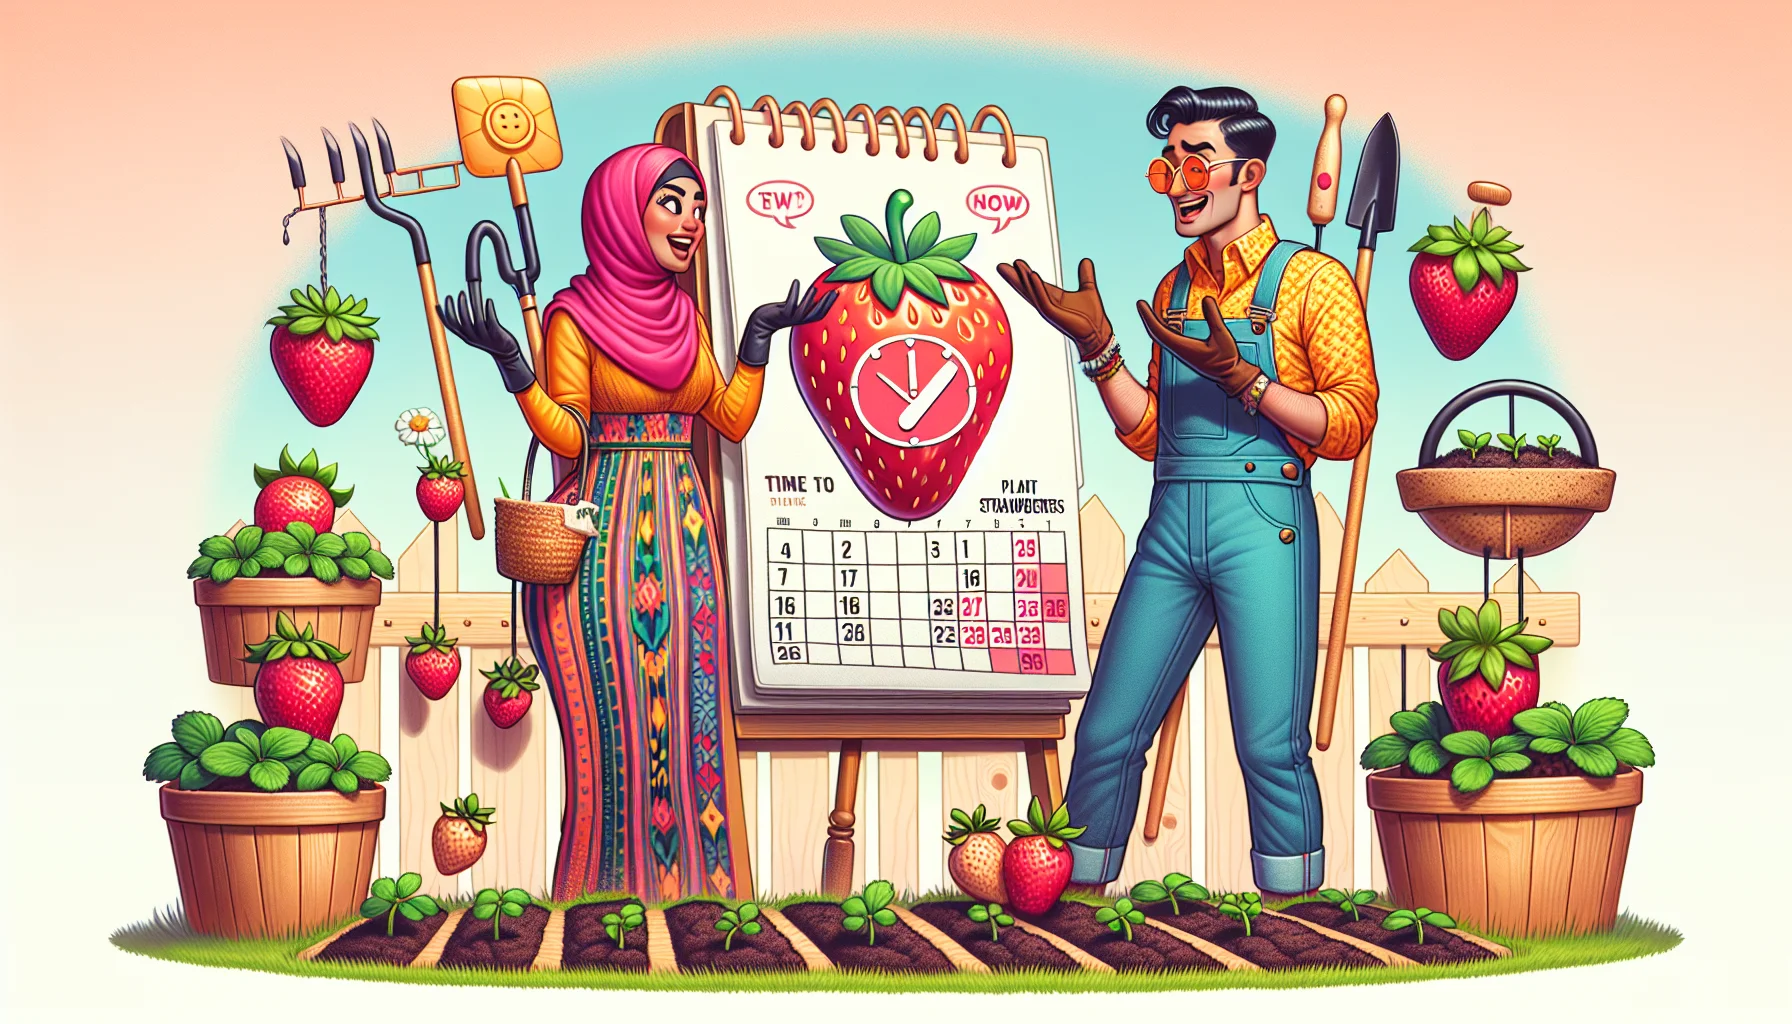 Create a playful and realistic image representing the best time to plant strawberries. Imagine a scene during Spring, where a Middle-Eastern woman and a Hispanic man are having a hilarious misunderstanding while looking at an oversized calendar with strawberry symbol on it. They dress in vibrant, but sensible gardening outfits and holding unique gardening tools. Beside them is an eager-to-plant garden full of sprouting seeds and a giant strawberry clock showing it's time to plant strawberries, implying the best time is now. They're surrounded by lush green strawberry patches. This whimsical image encourages people to enjoy gardening.